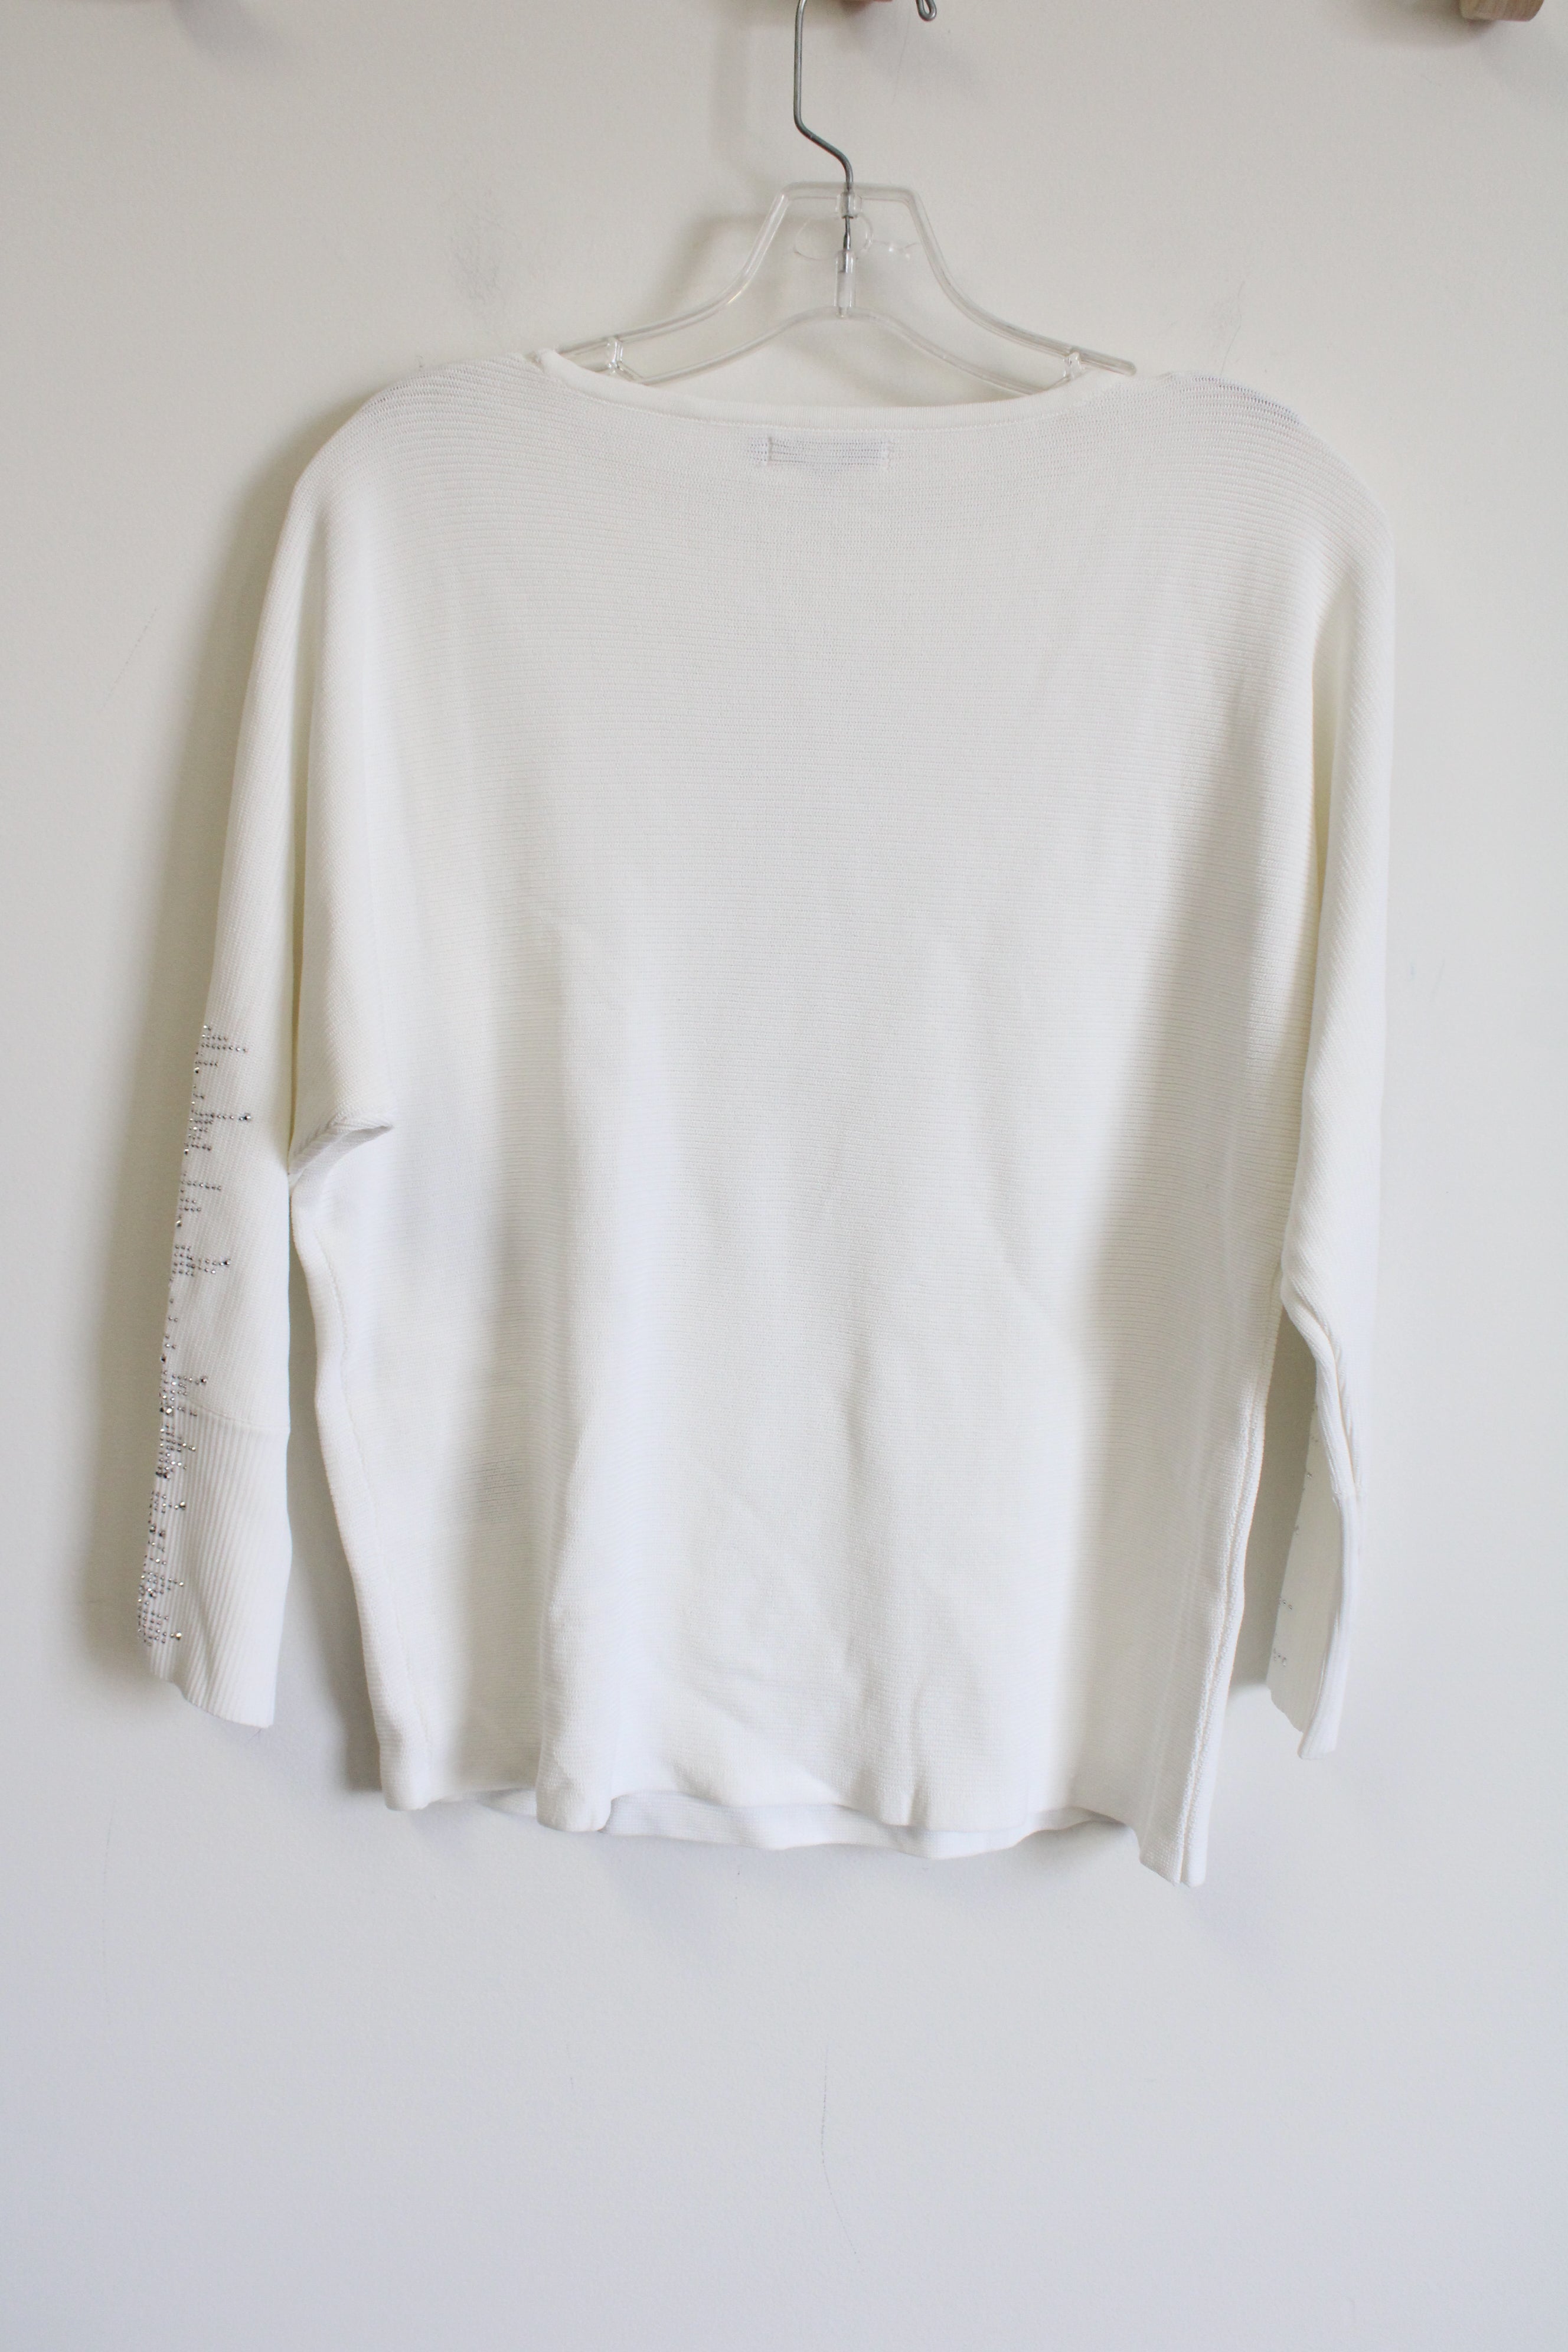 Chico's White Silver Bedazzled Knit Sweater | 1 (M)